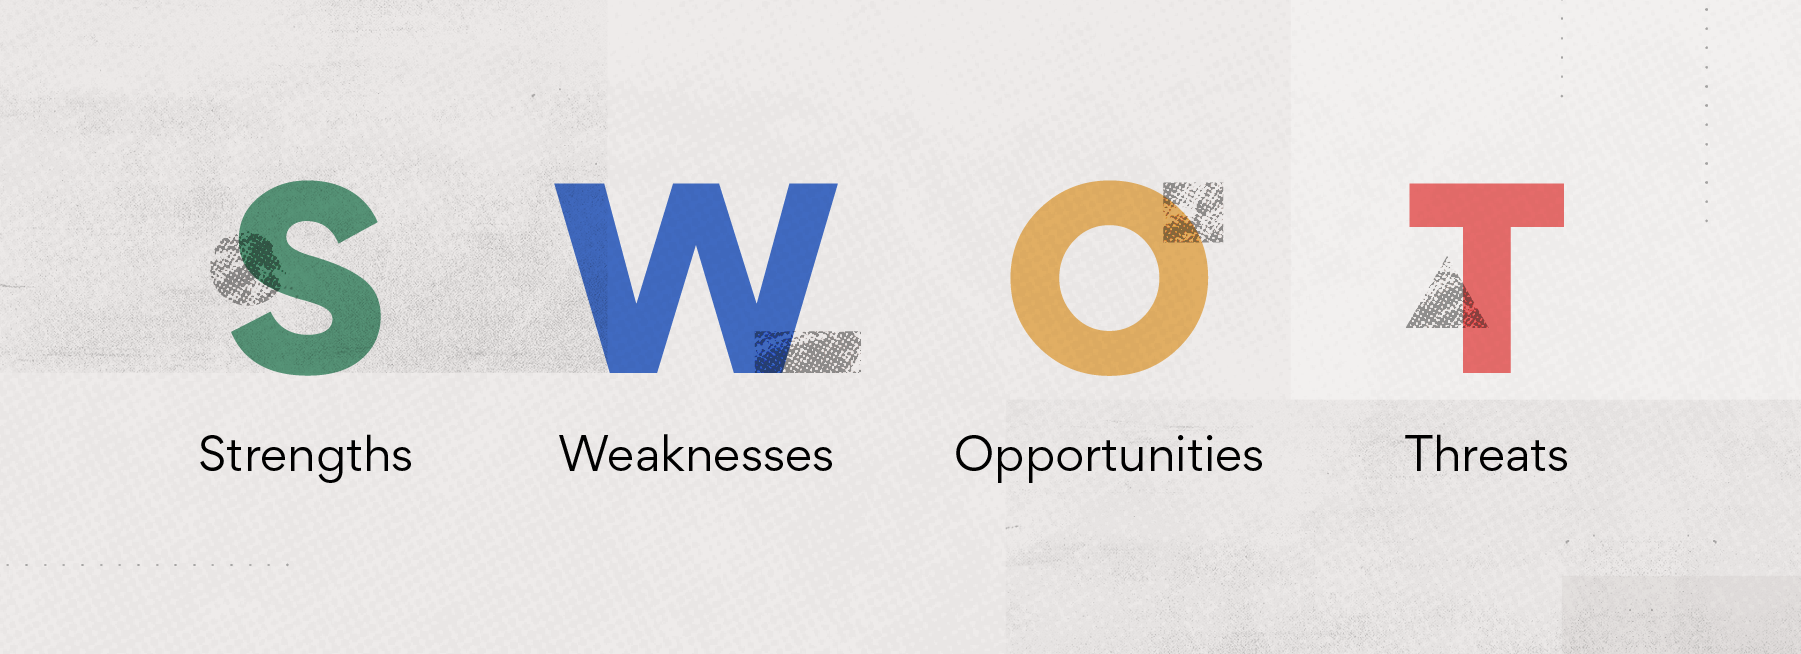 SWOT letter abbreviations and meanings